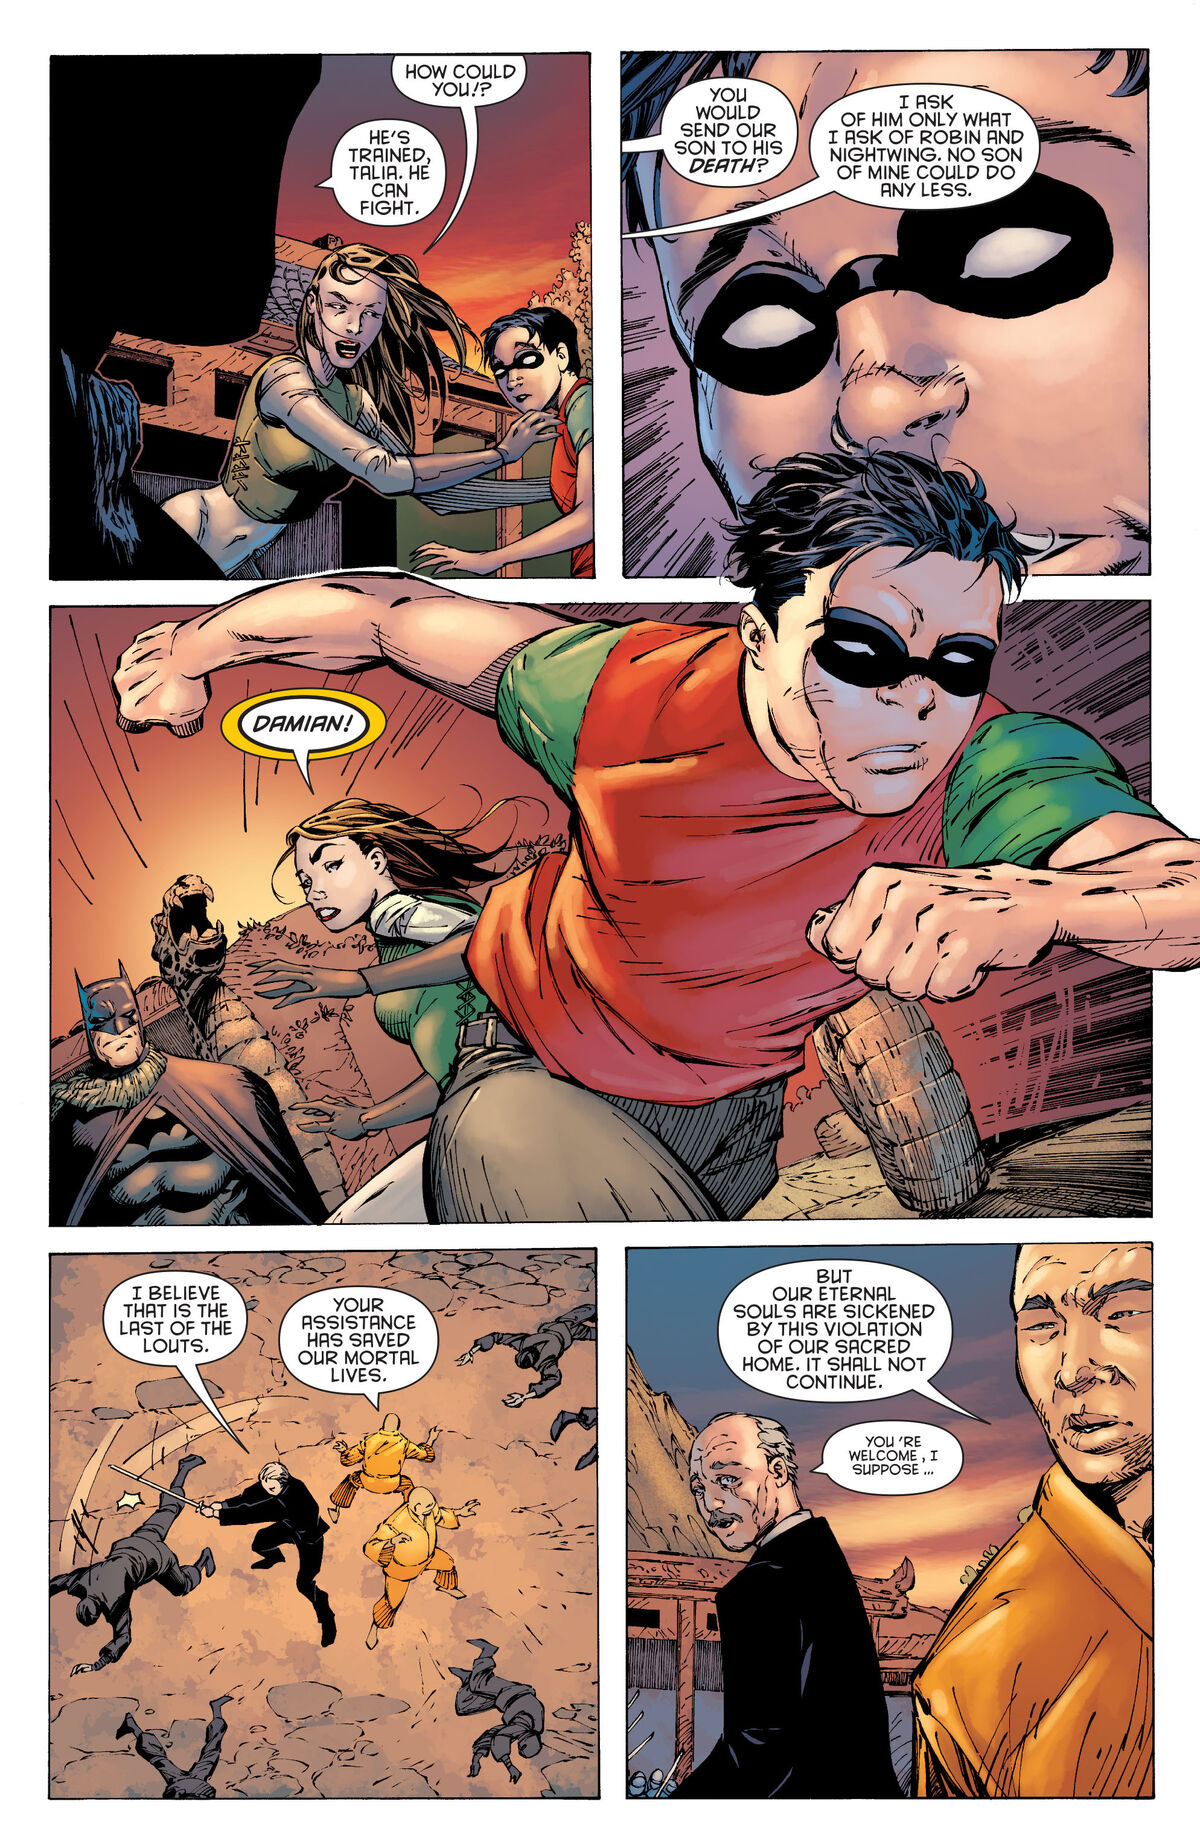 Damian is eager to join the fight in &quot;The Ressurection of Ra's Al Ghul&quot;